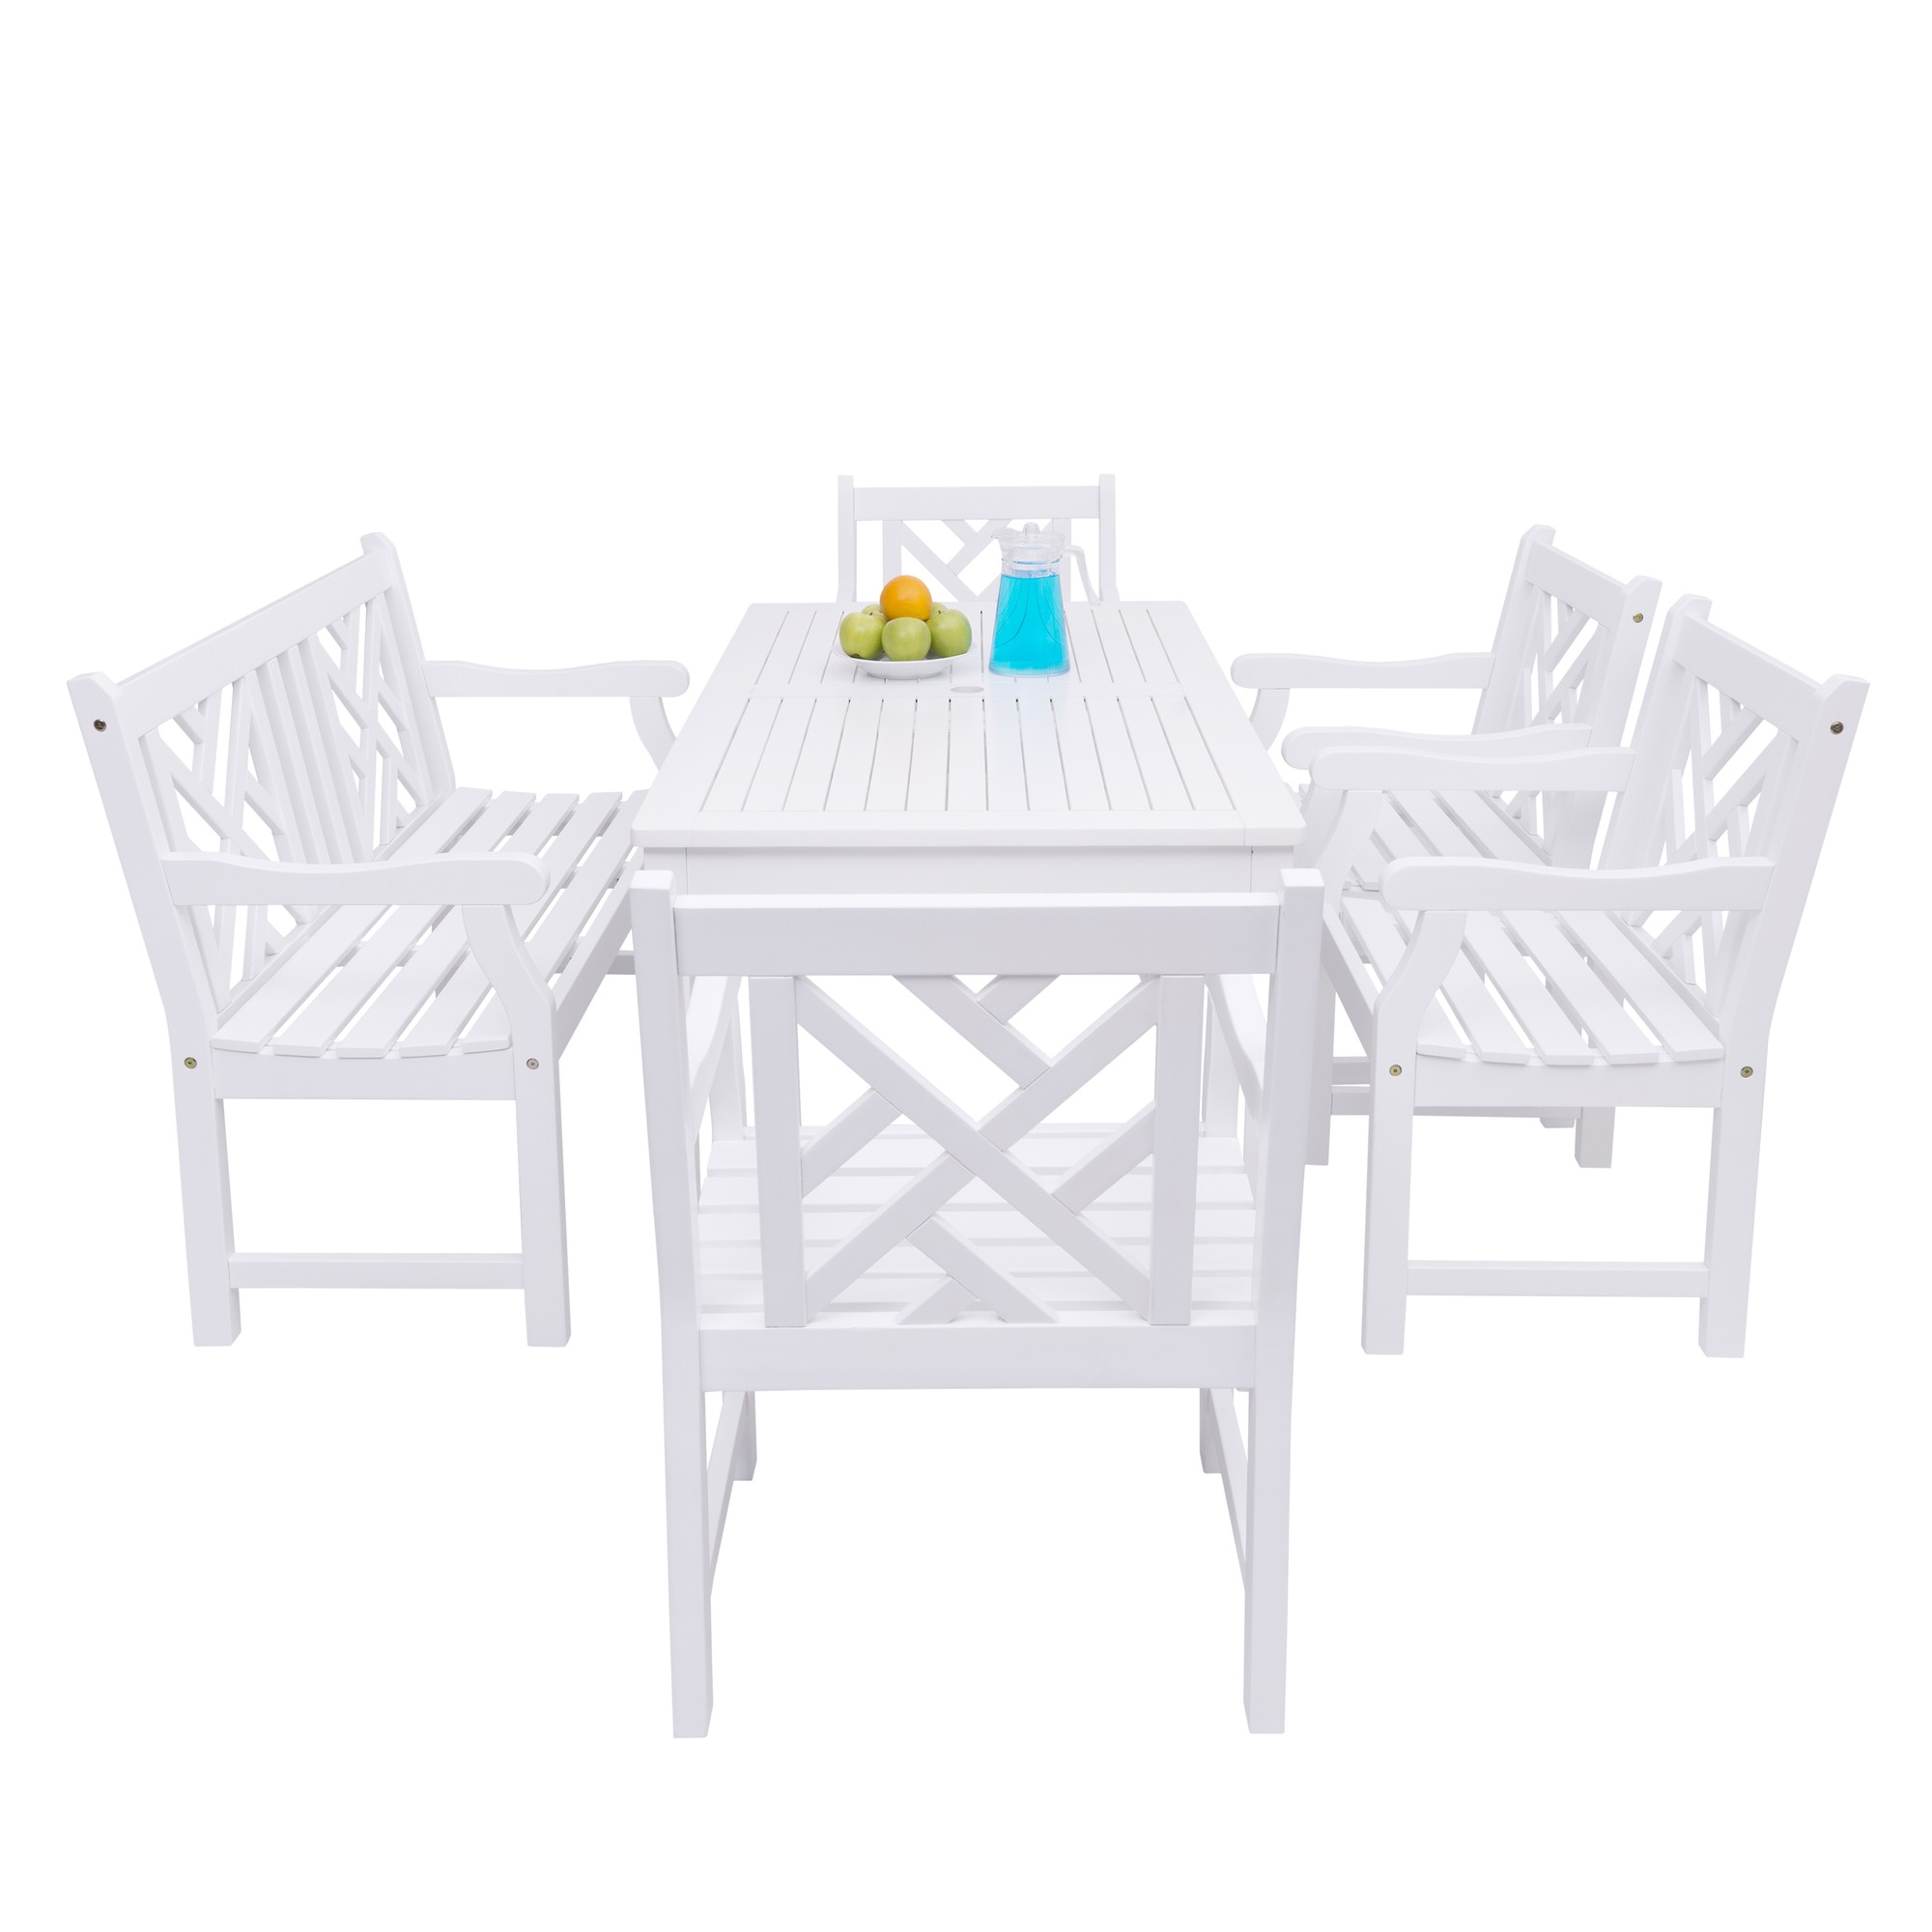 Bradley Outdoor 6-piece Wood Patio Dining Set with 4-foot Bench in White